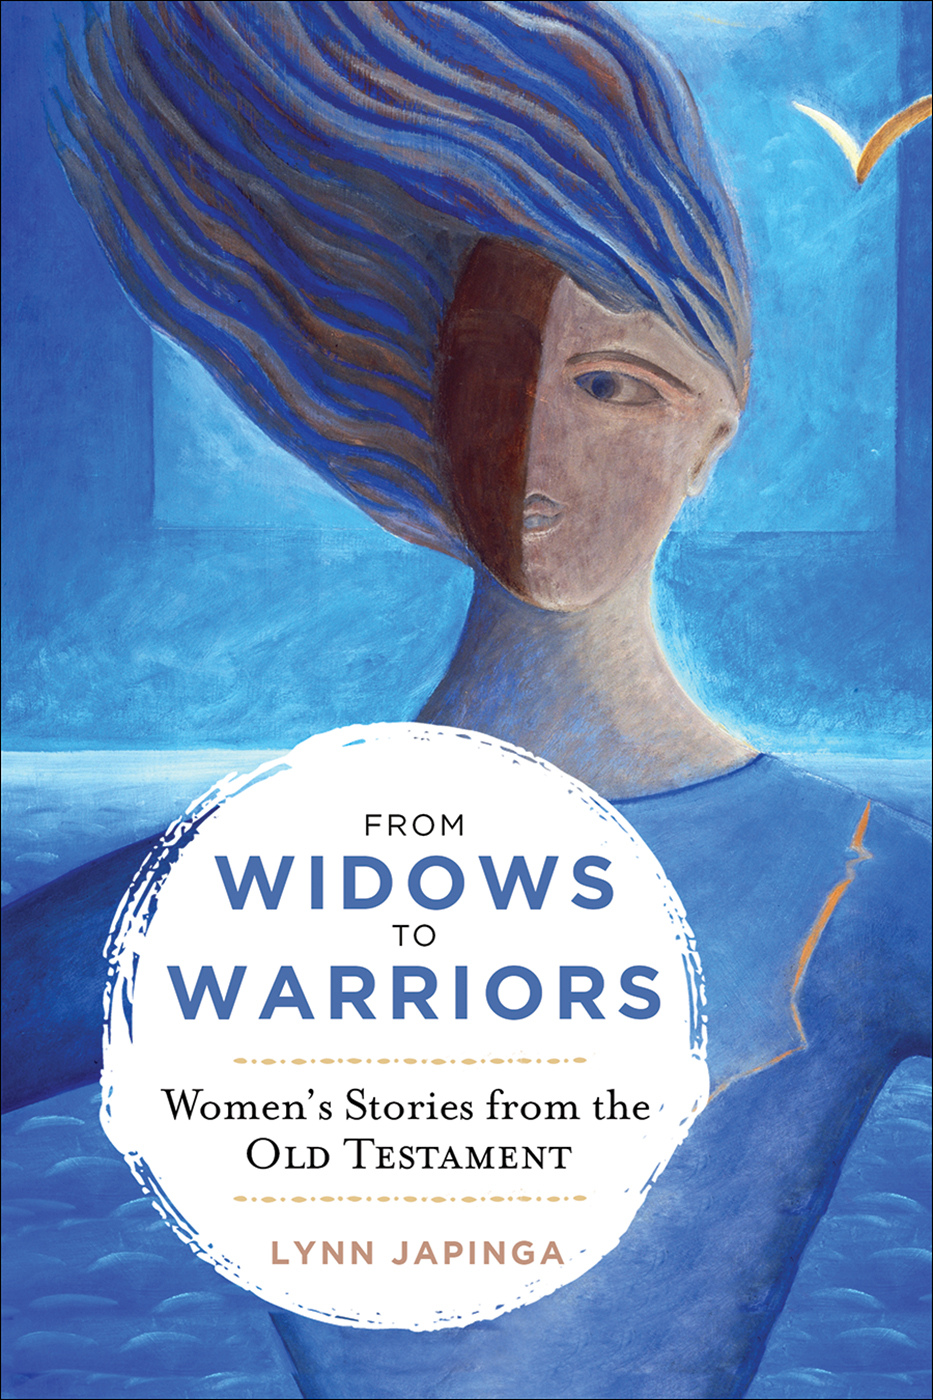 From Widows to Warriors